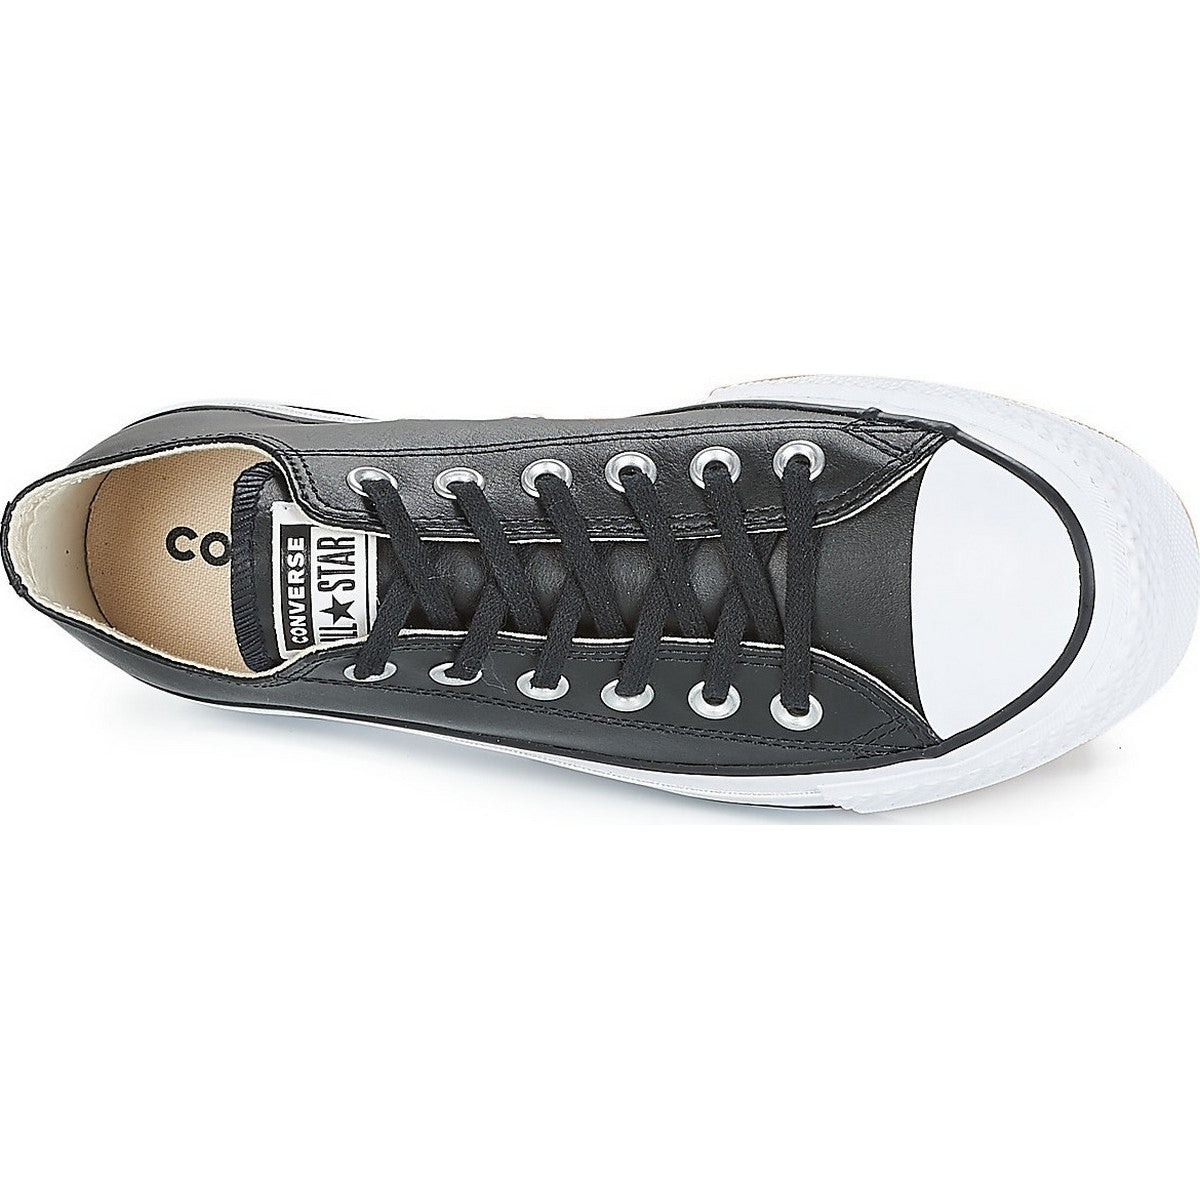 Converse Chuck Taylor All Star Lift Clean Leather 561681C